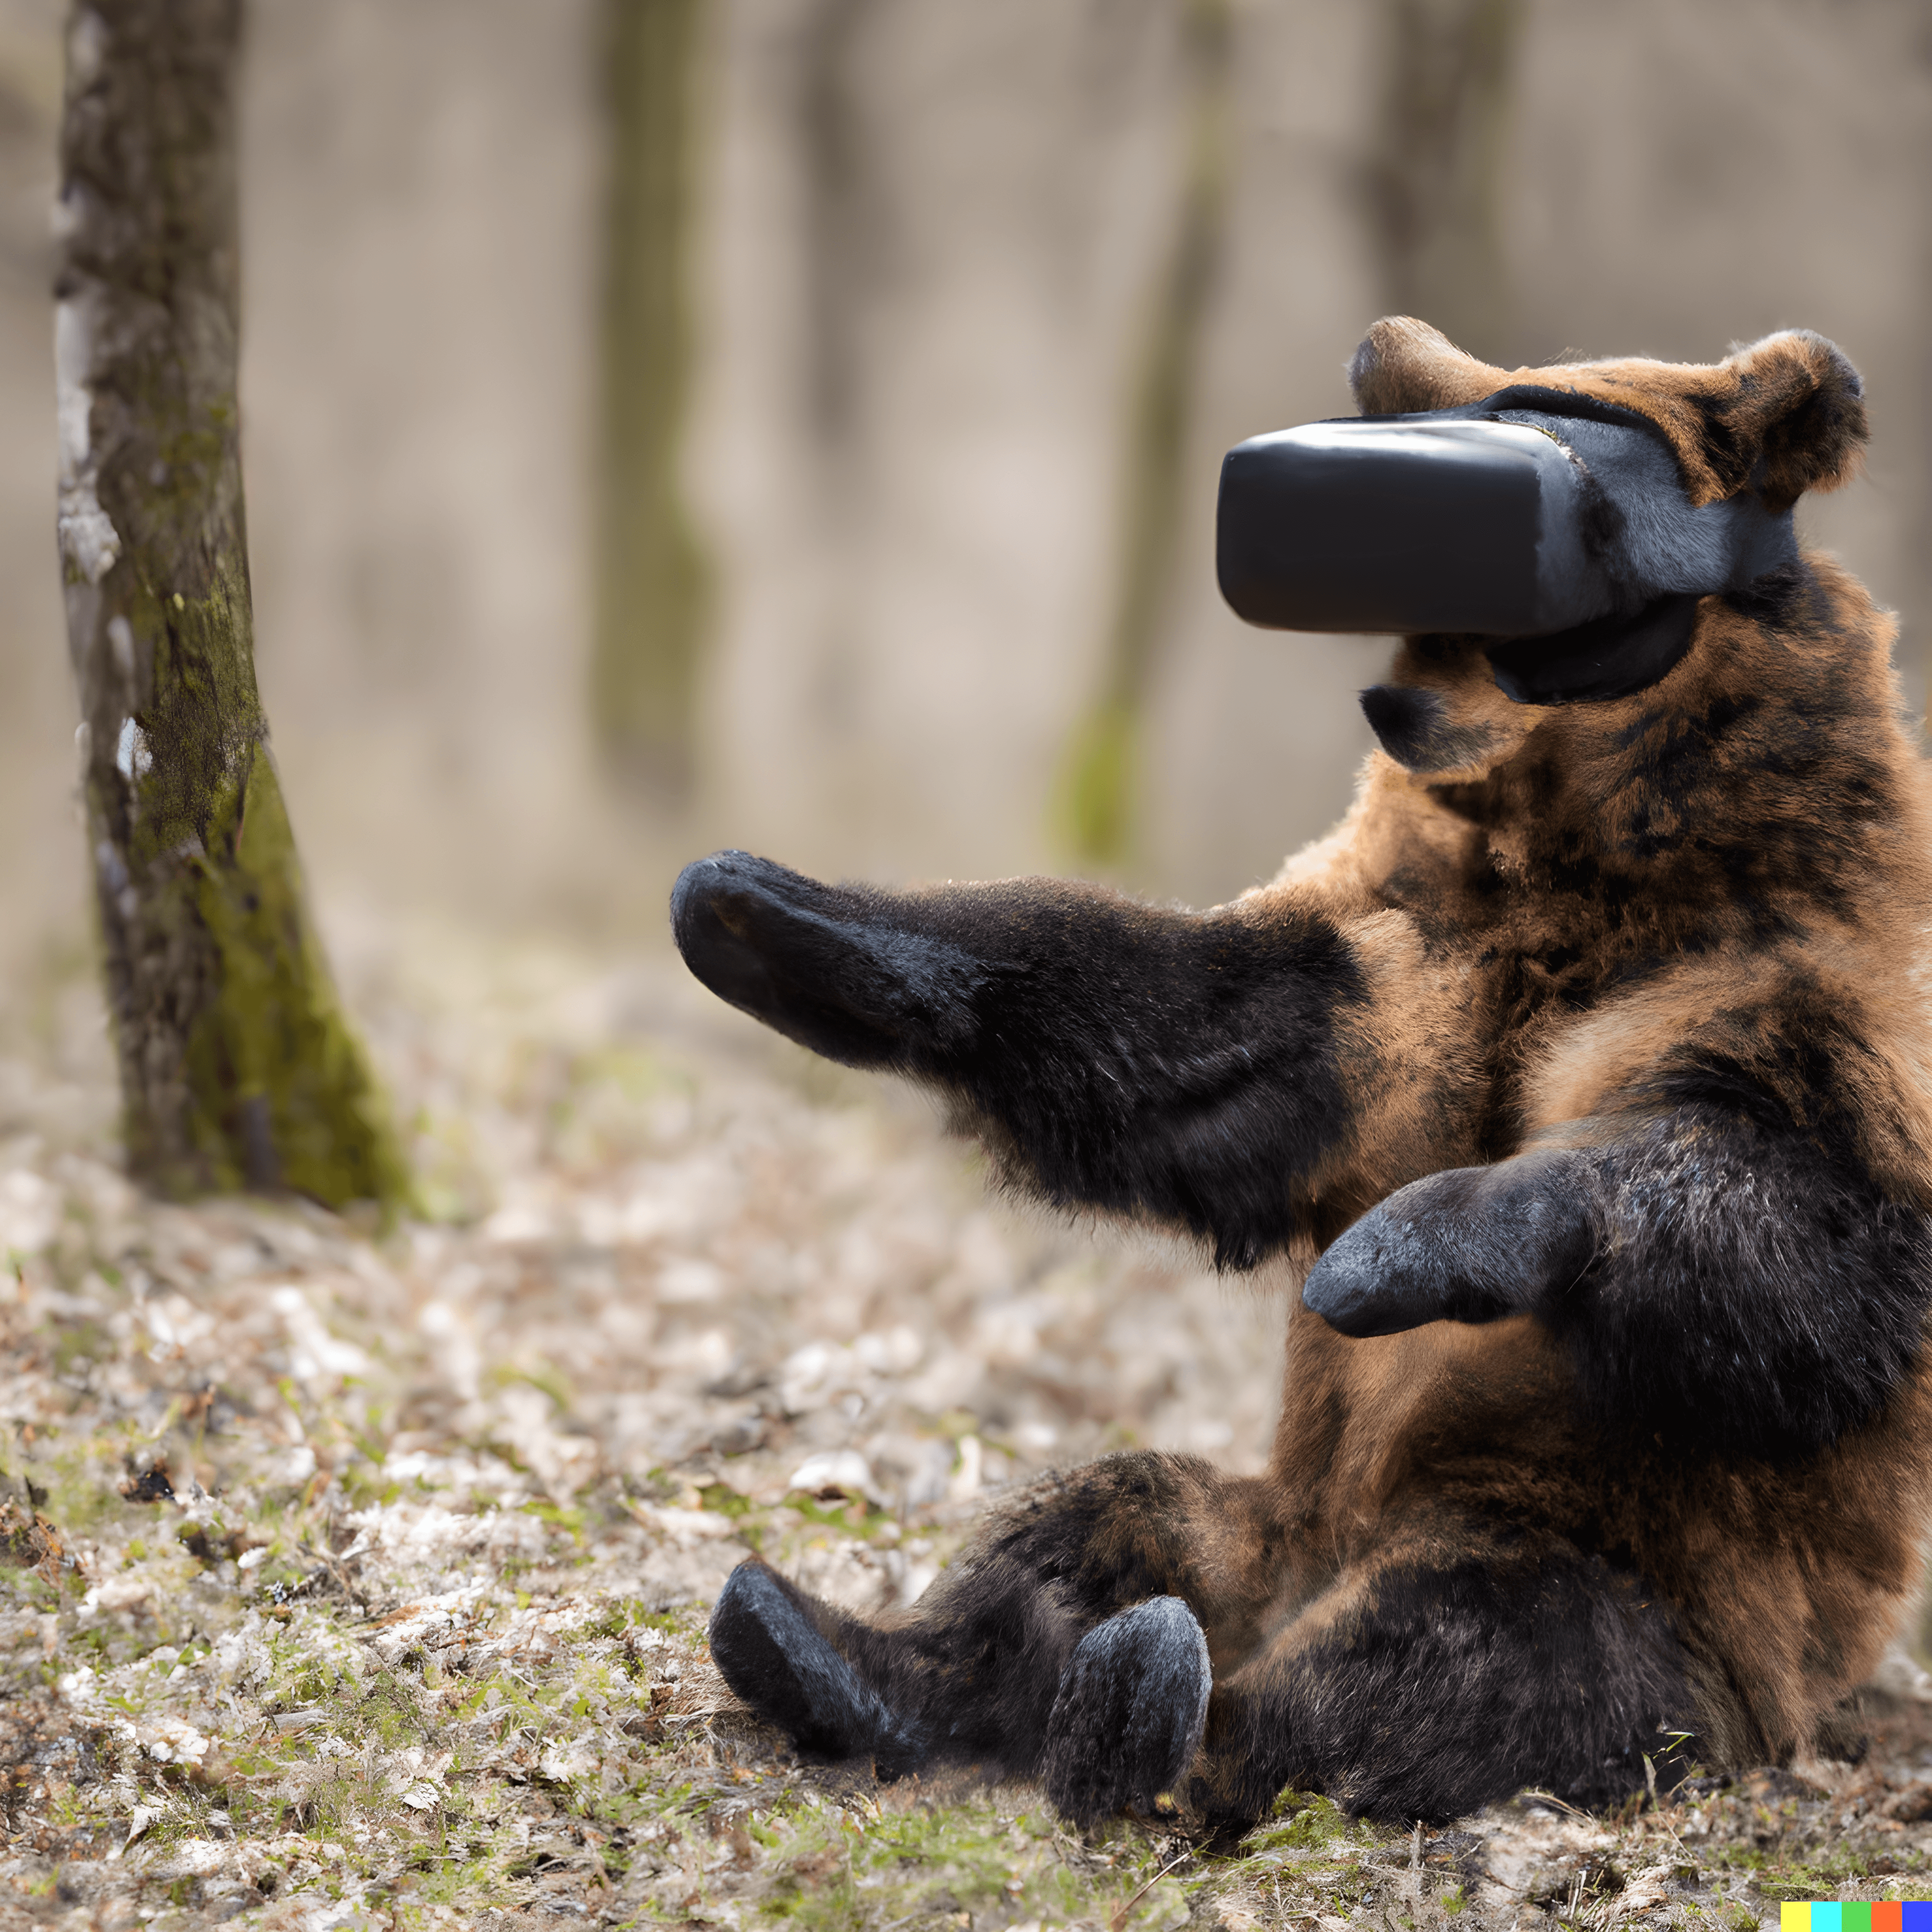 A bear in the Metaverse 4